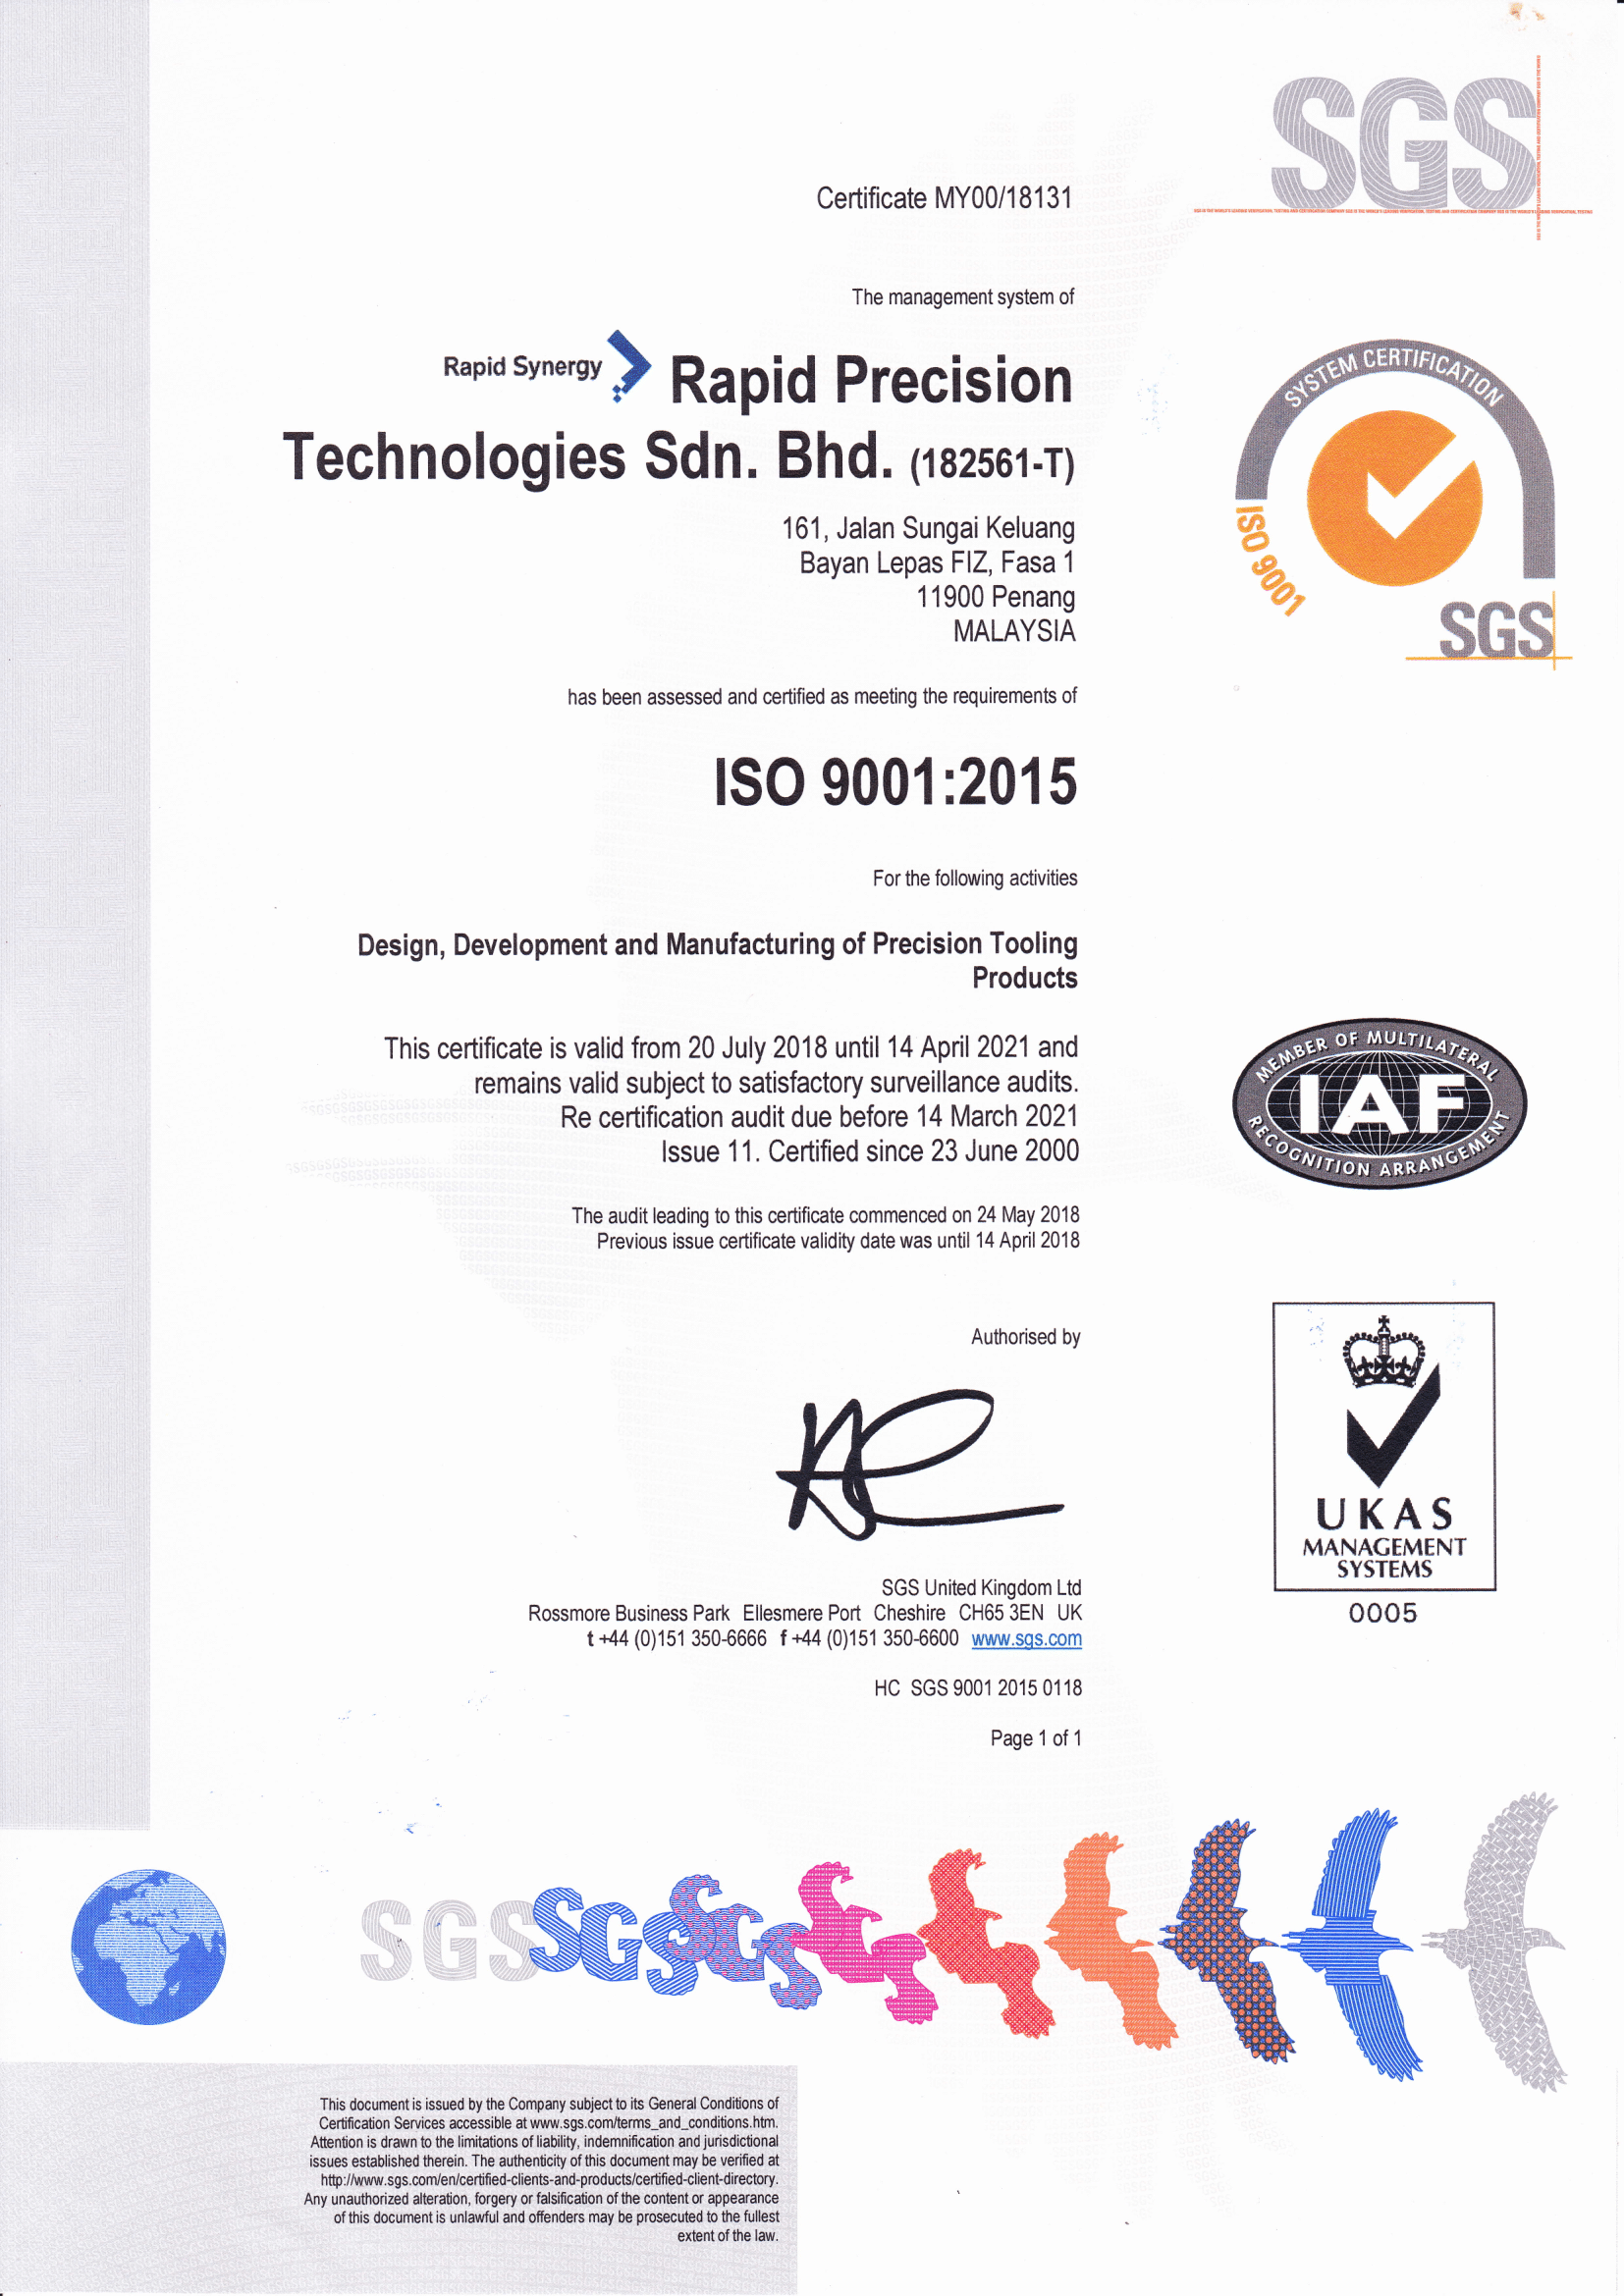 MS ISO9001:2015